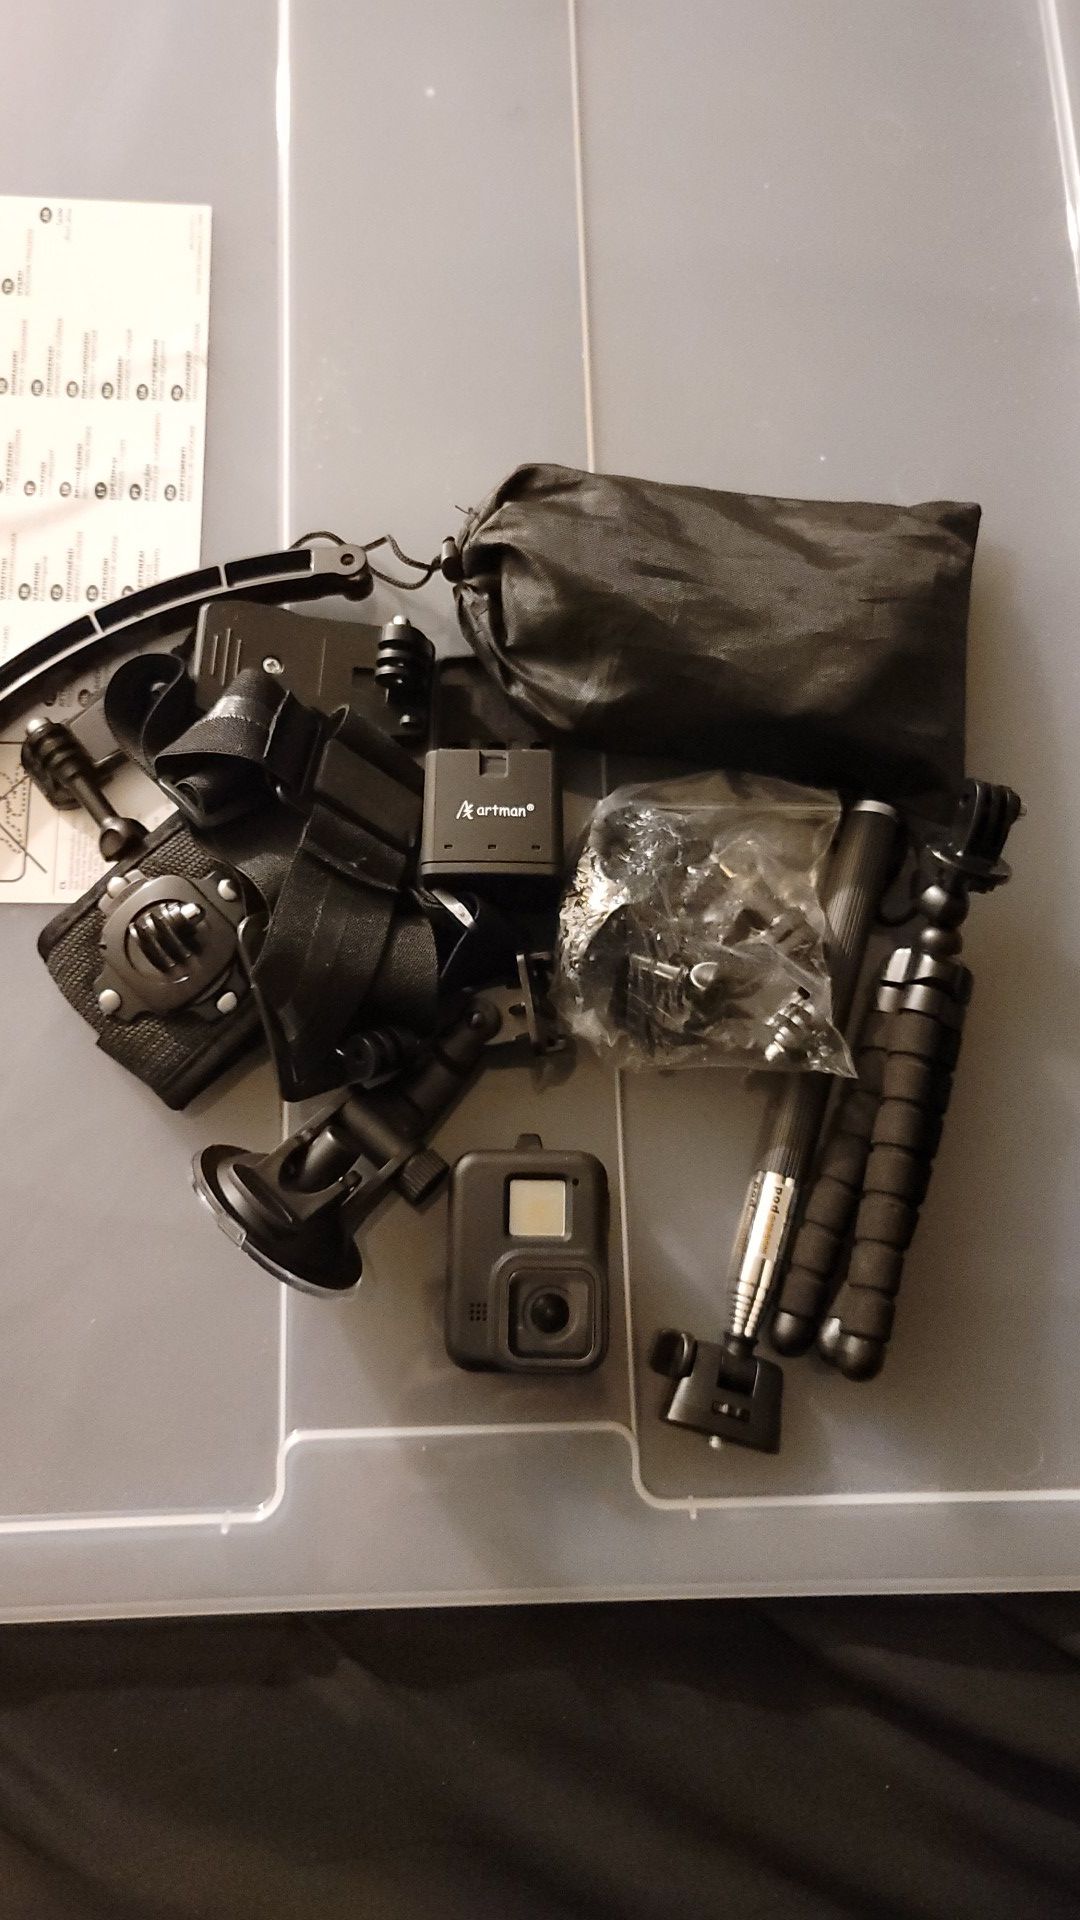 Gopro hero 8 black with accessories and batteries